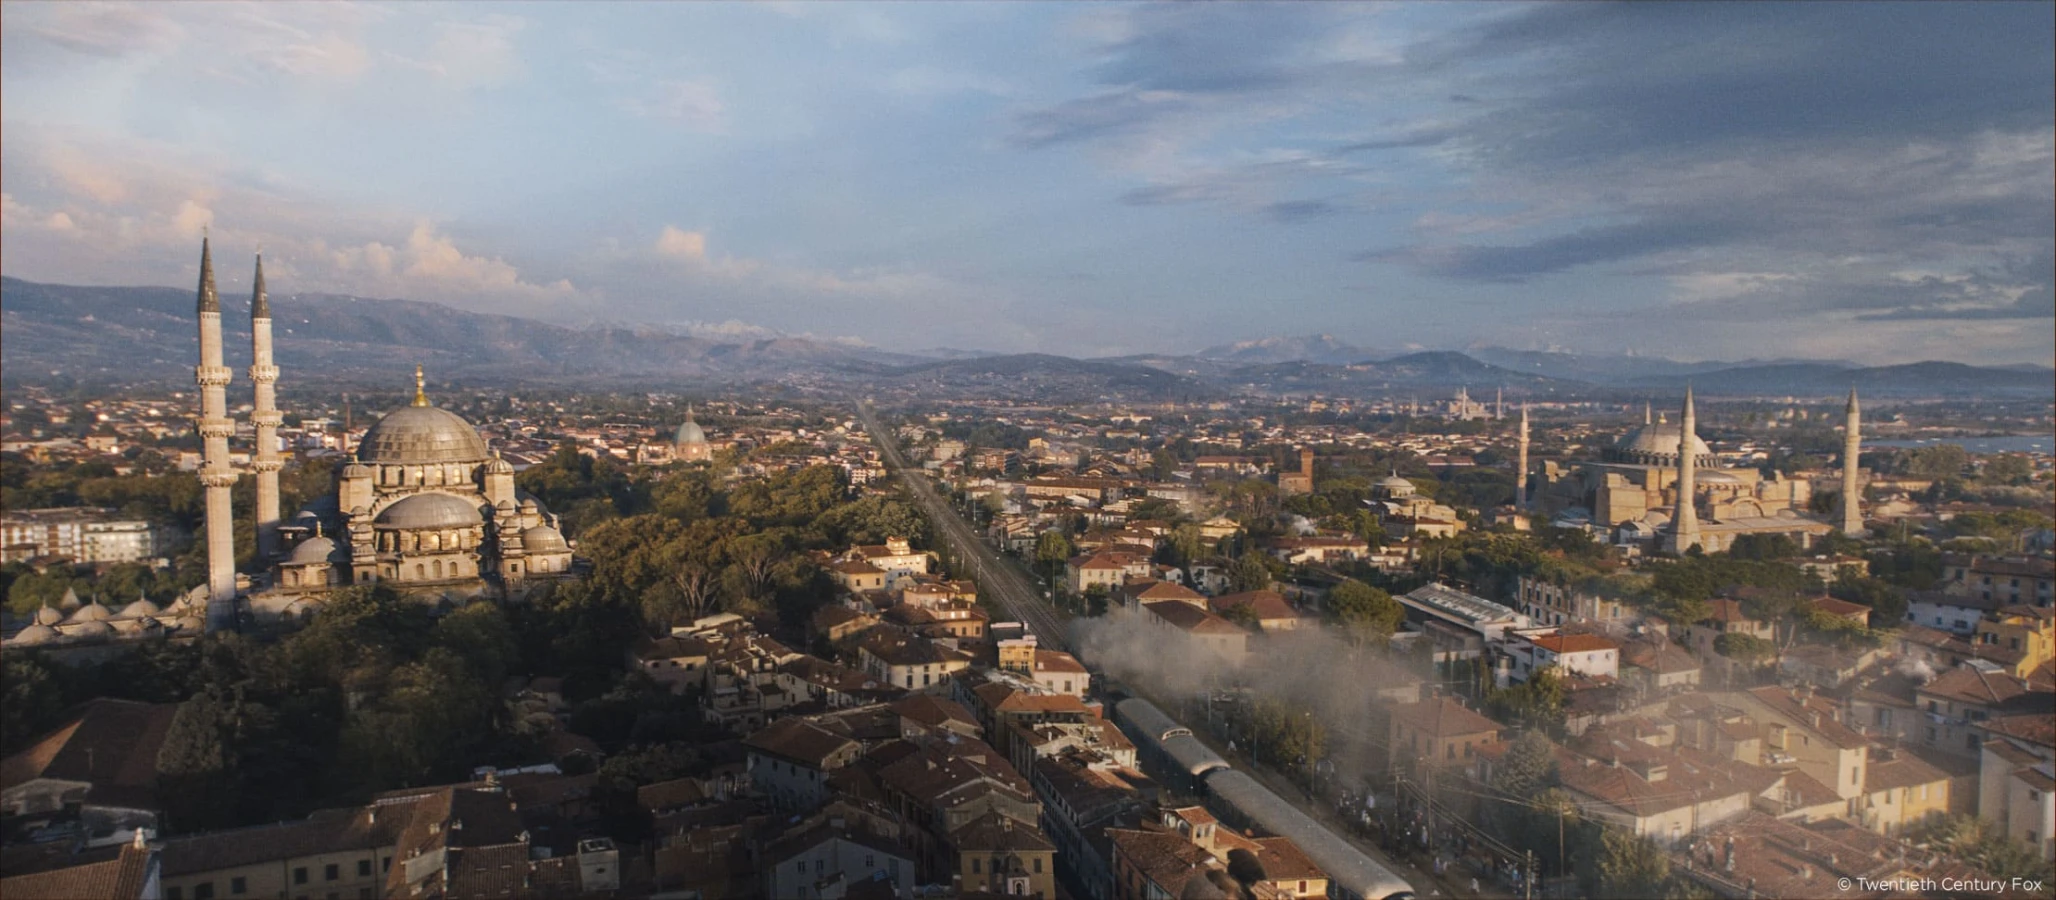  Murder on The Orient Express Aerial view of the train passing through Istanbul with a shot of a mosque Raynault vfx 